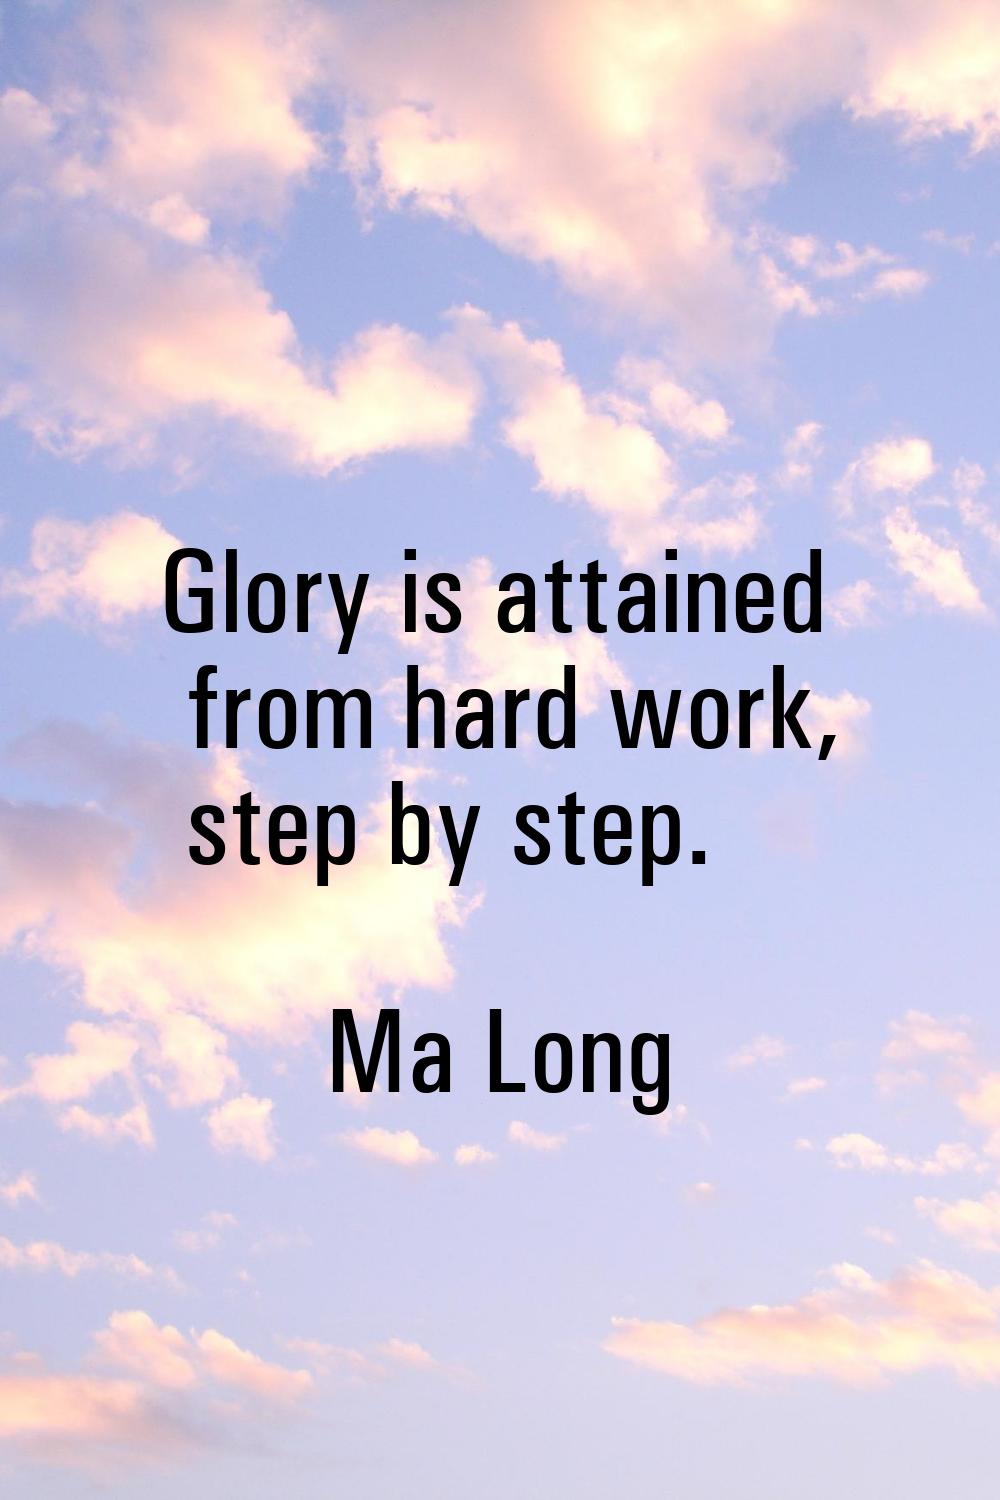 Glory is attained from hard work, step by step.